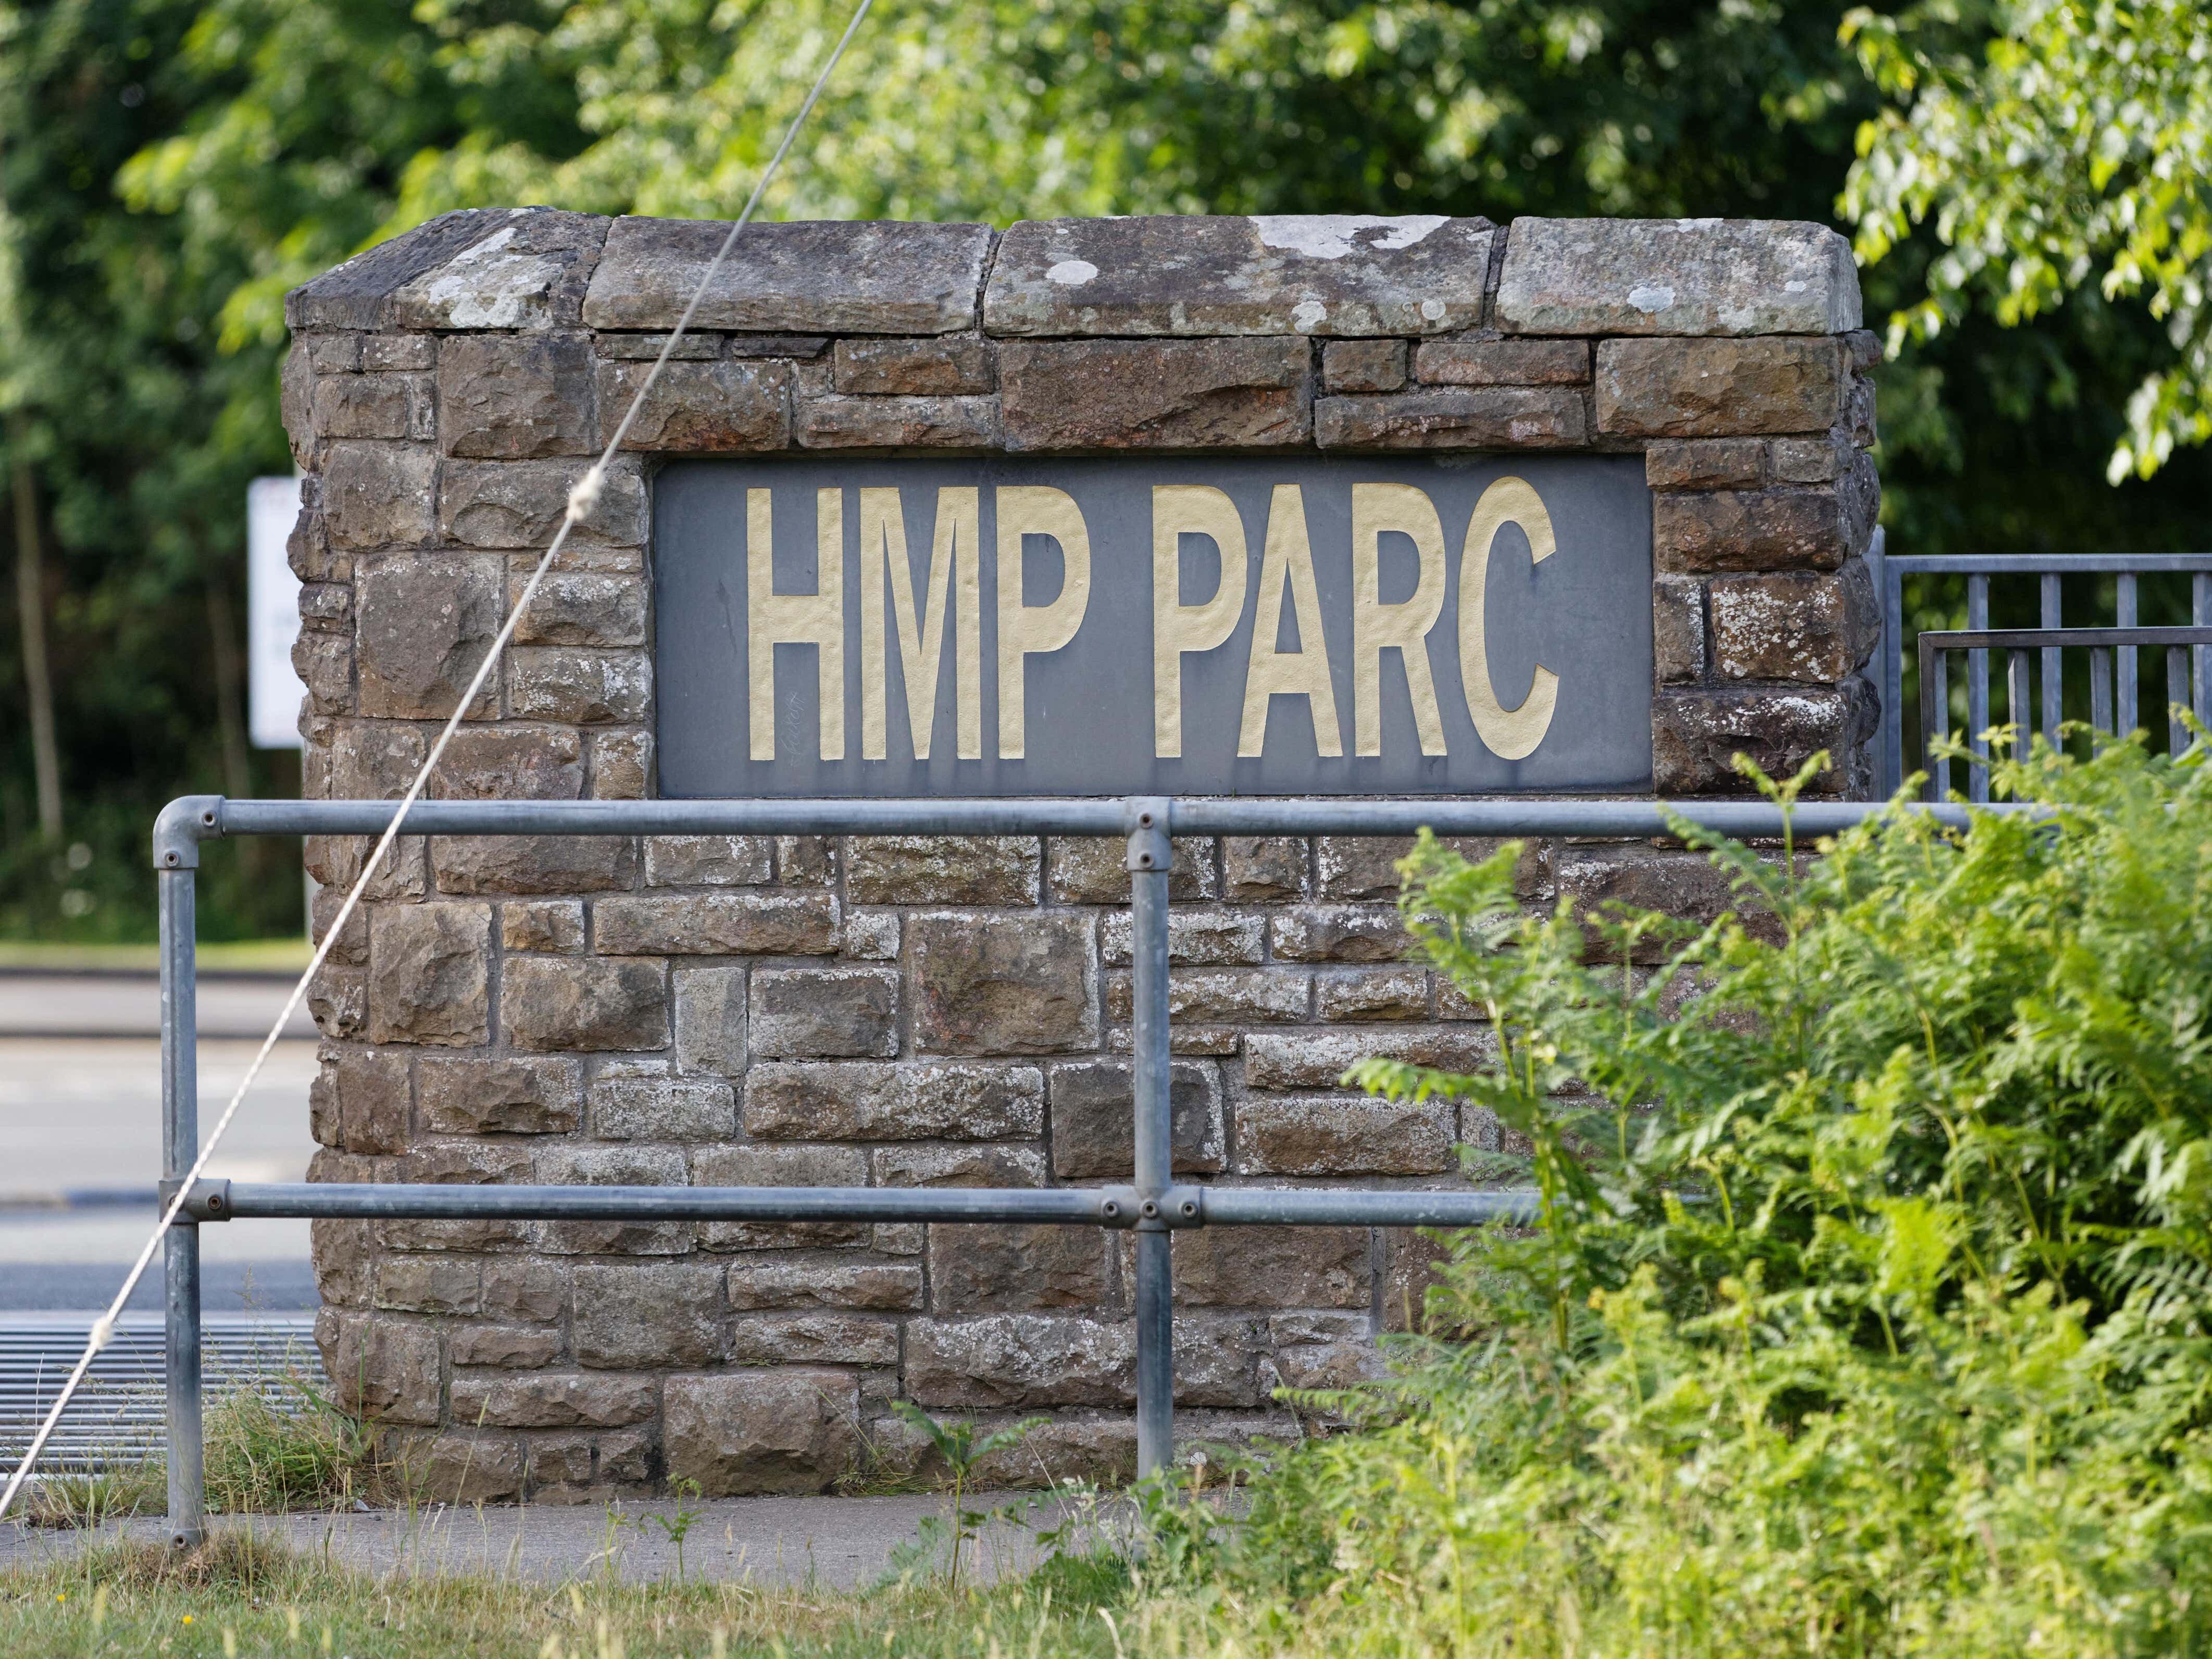 MP calls for Government to take over running of Parc Prison following deaths